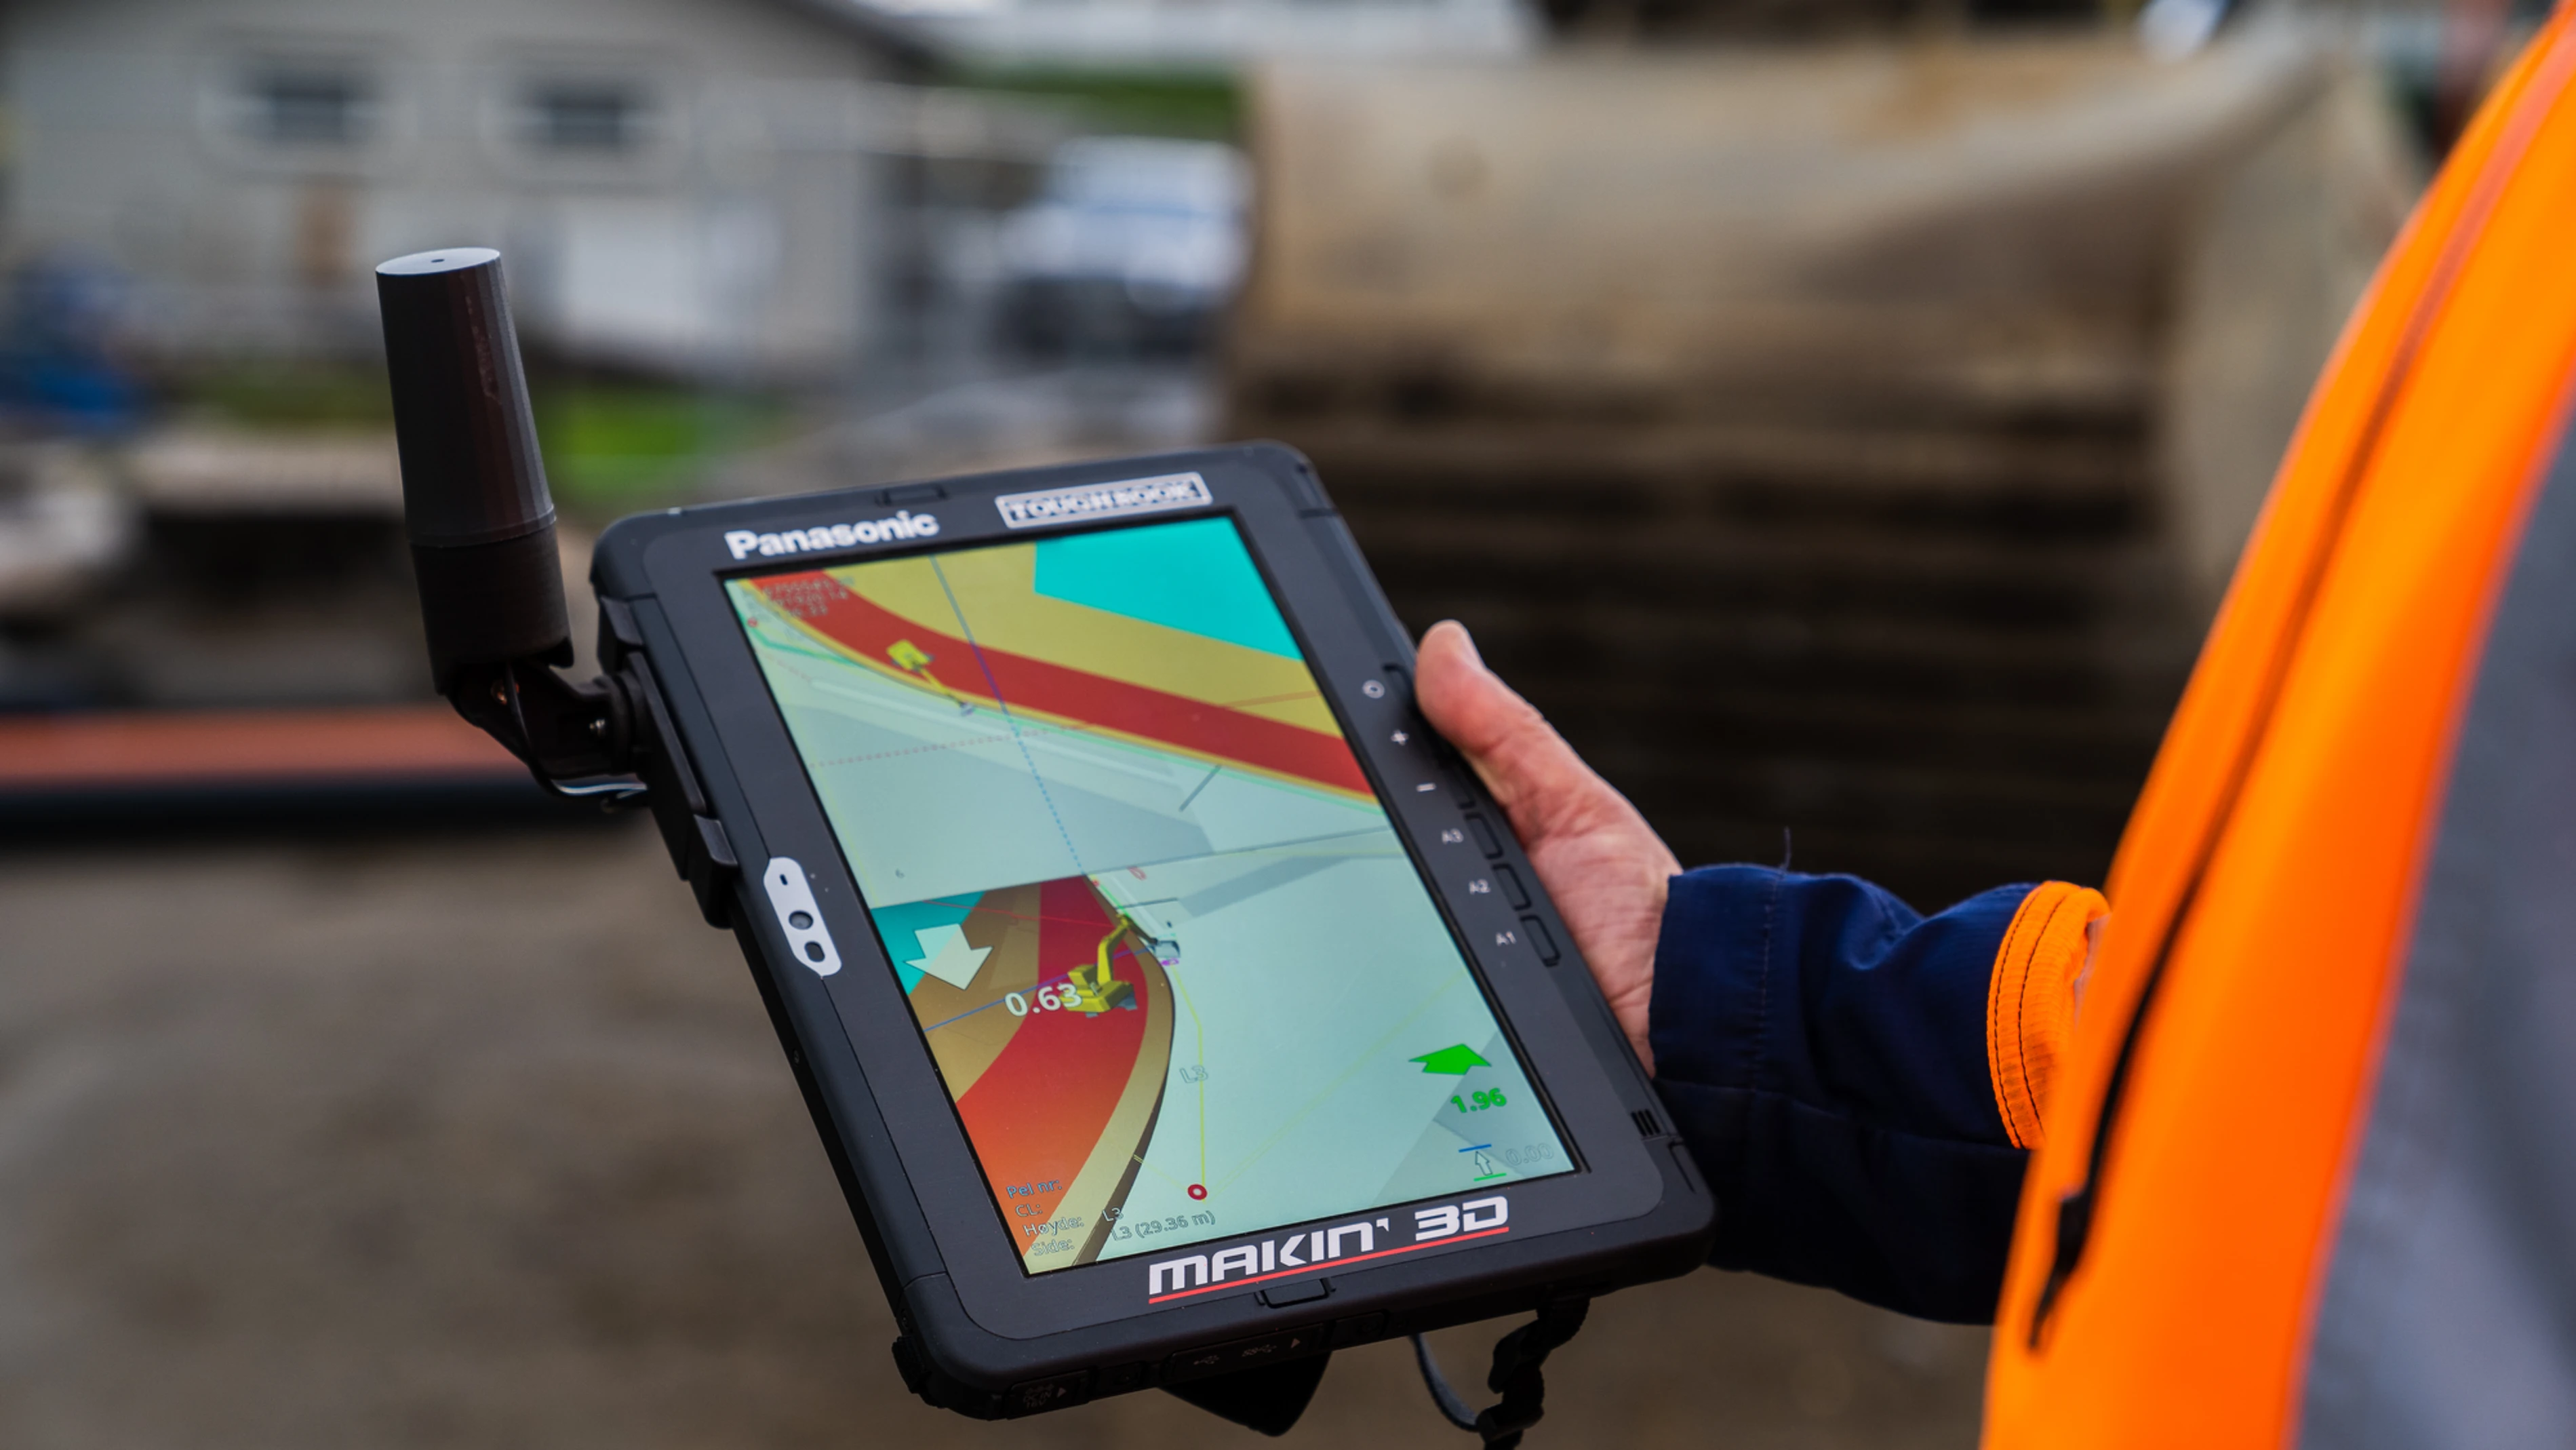 The handy Makin' PerFormans solution offers the foreman live data about the project.